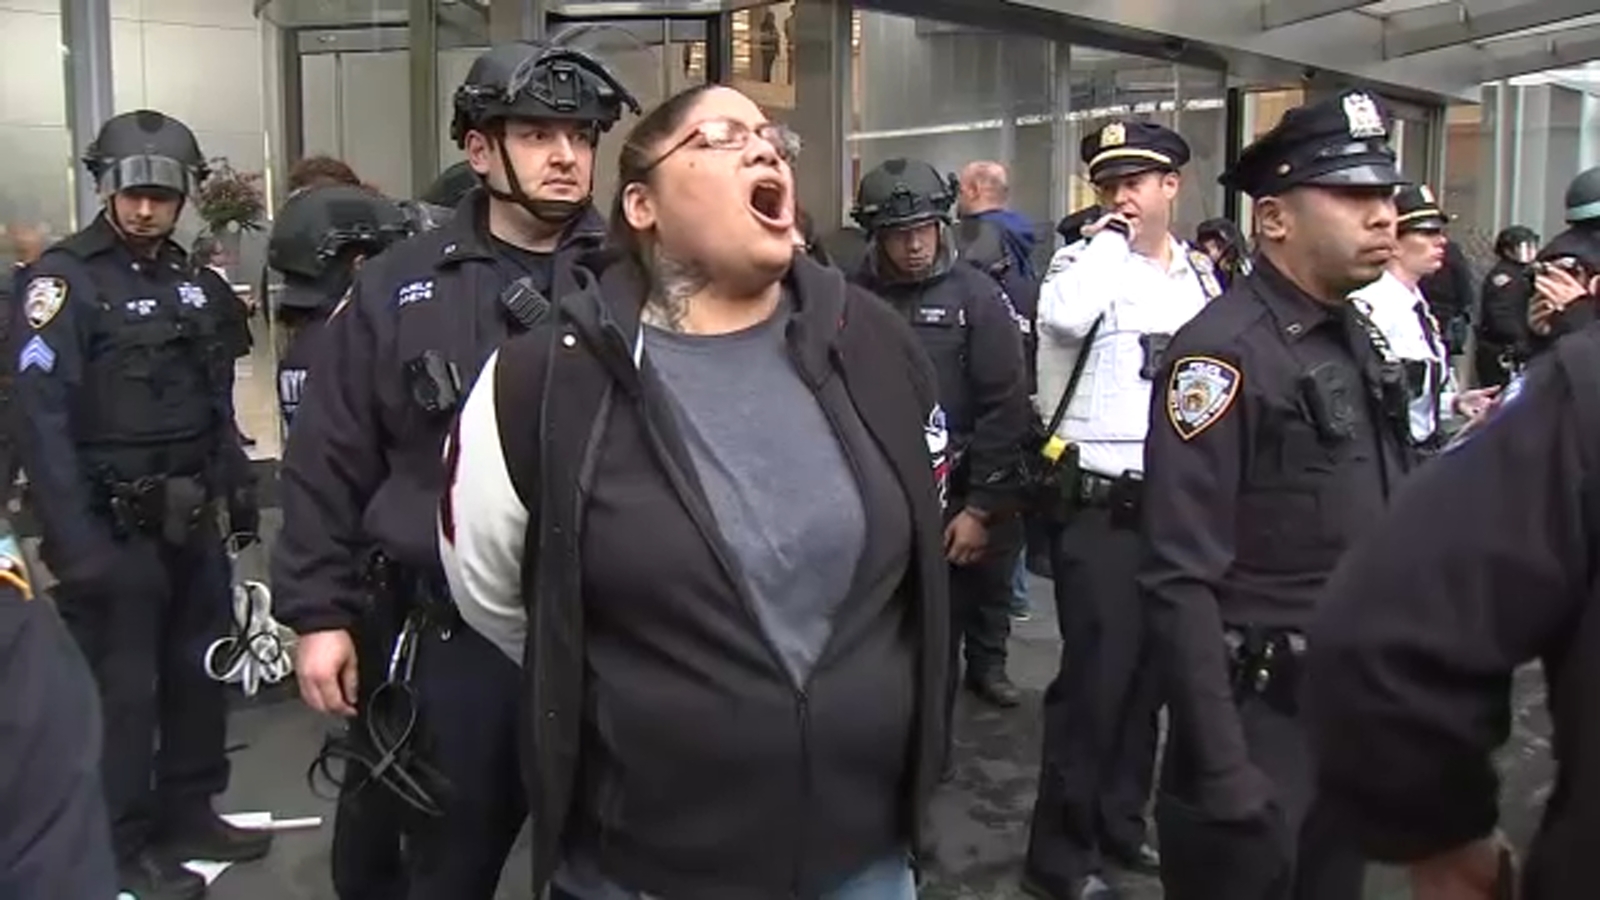 Earth Week climate protest outside Citigroup headquarters leads to arrests in Tribeca section of Manhattan in New York City [Video]